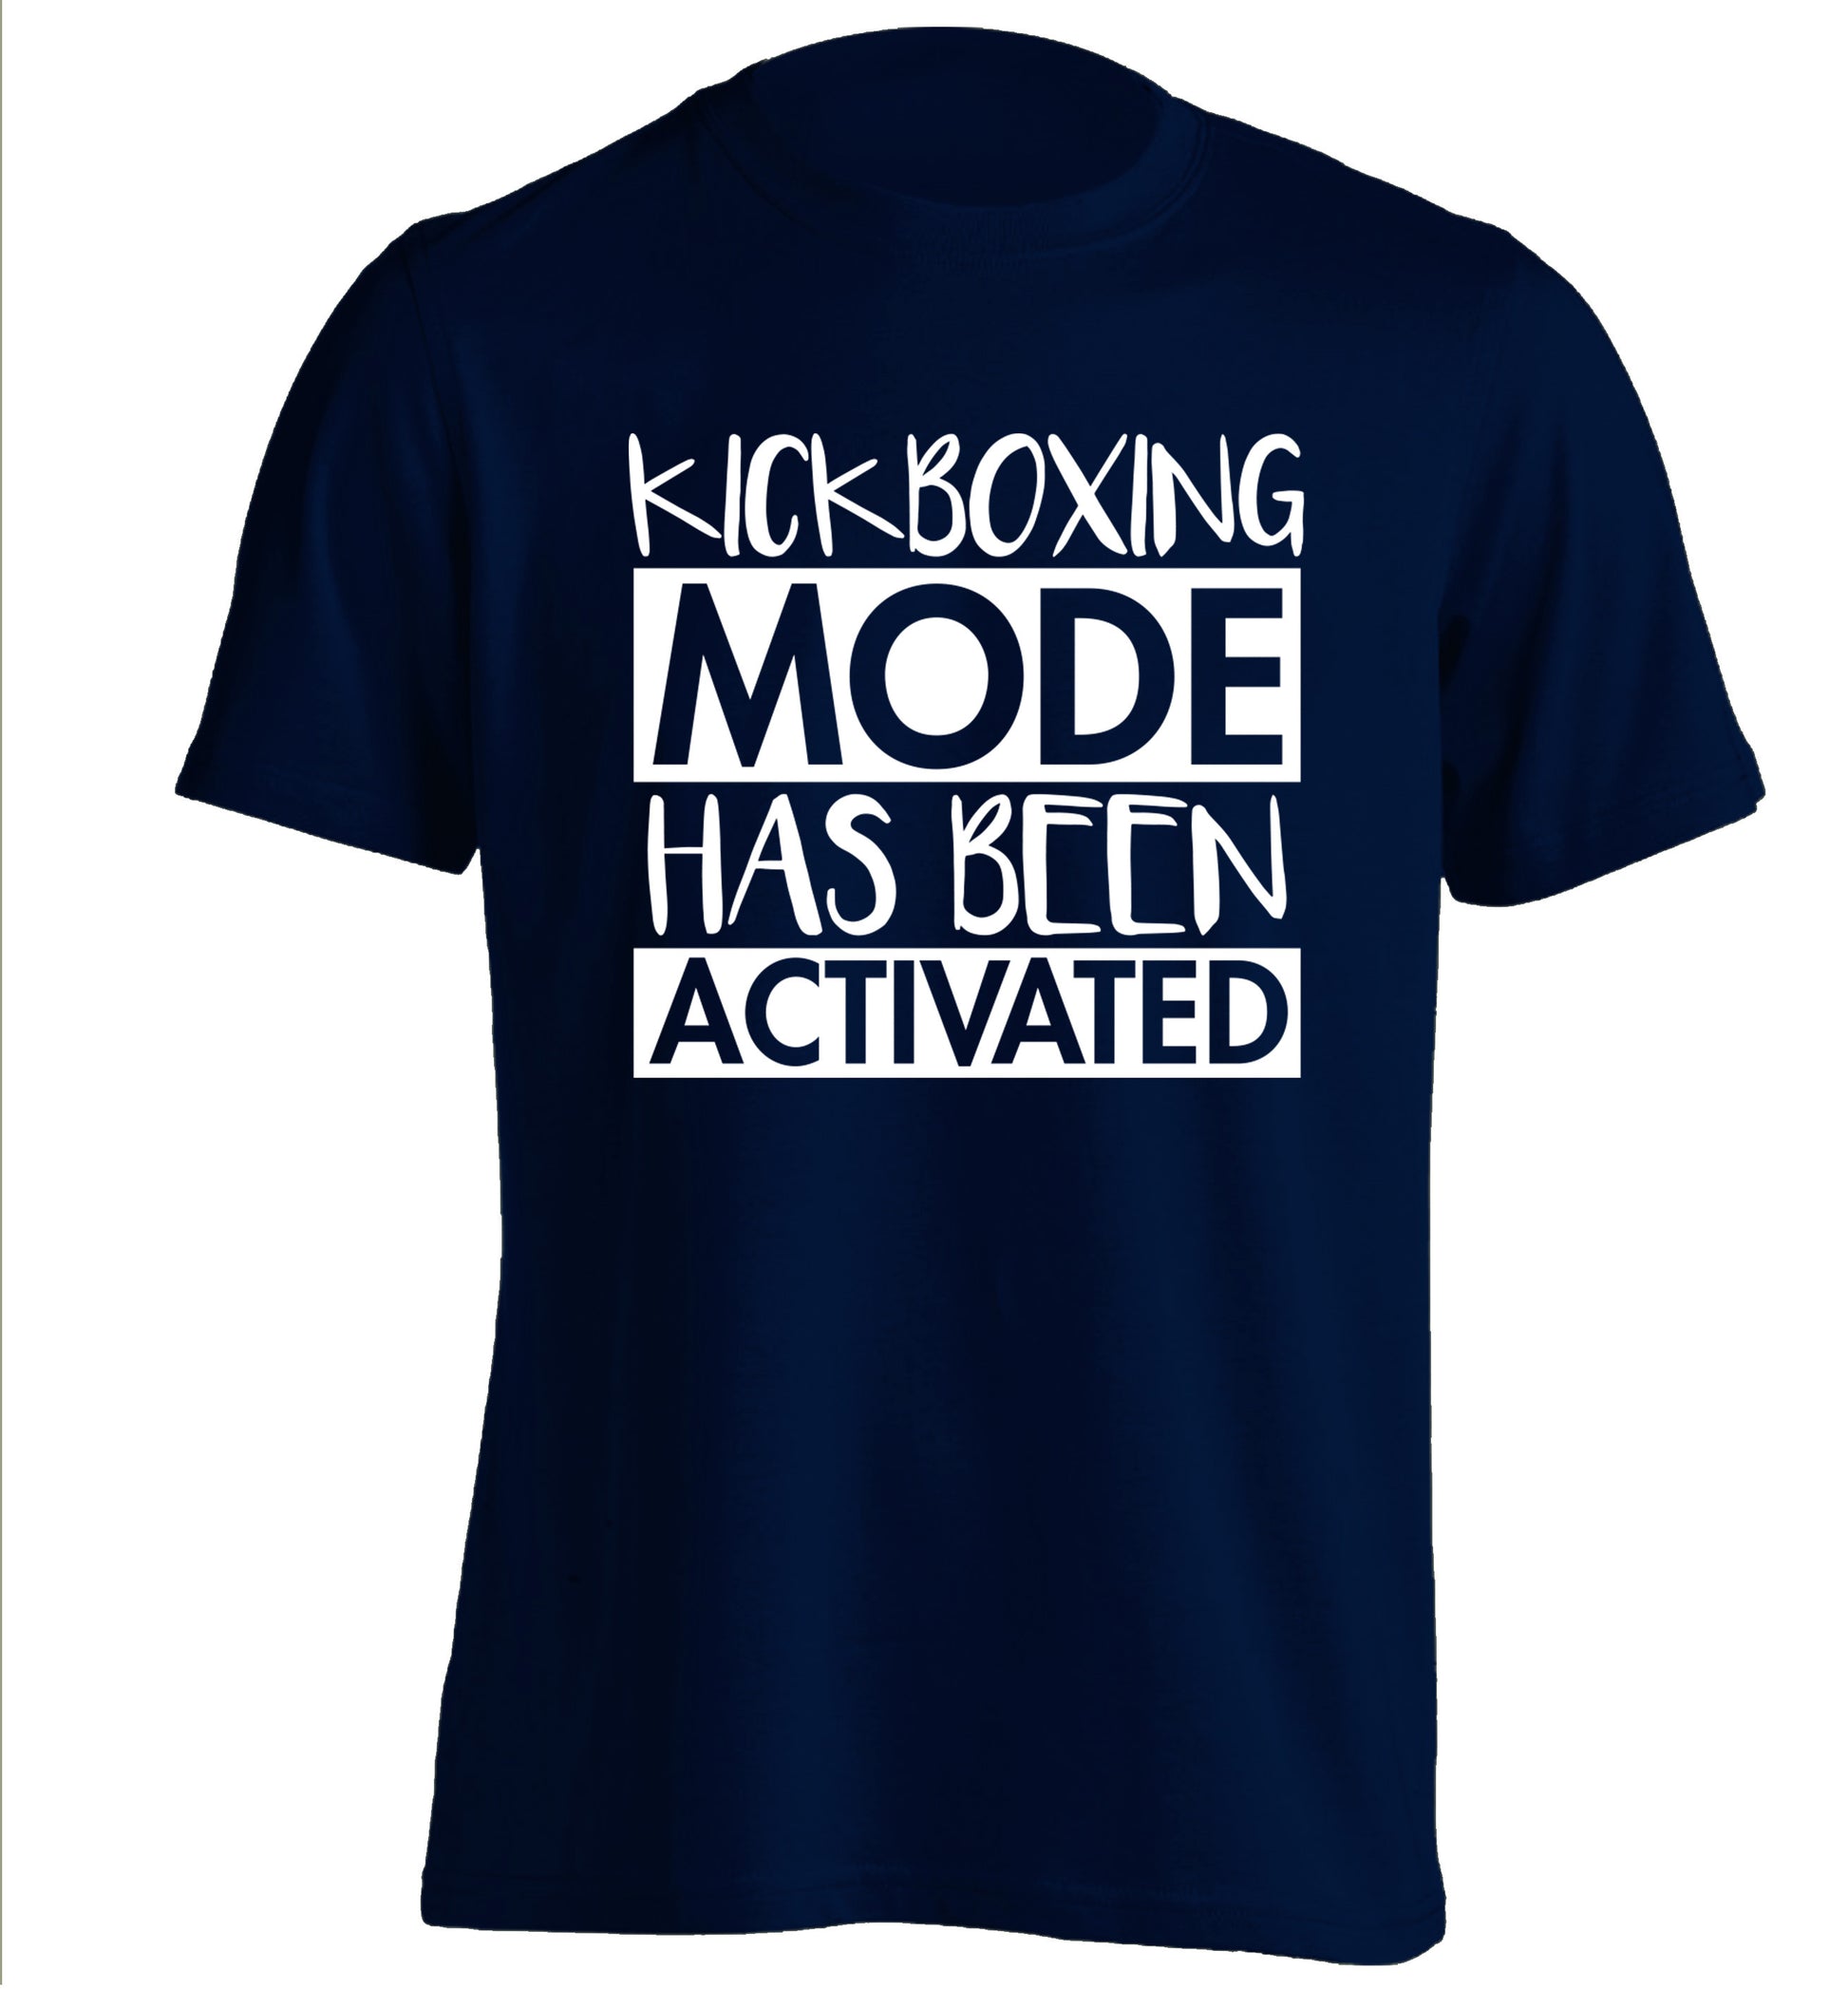 Kickboxing mode activated adults unisex navy Tshirt 2XL